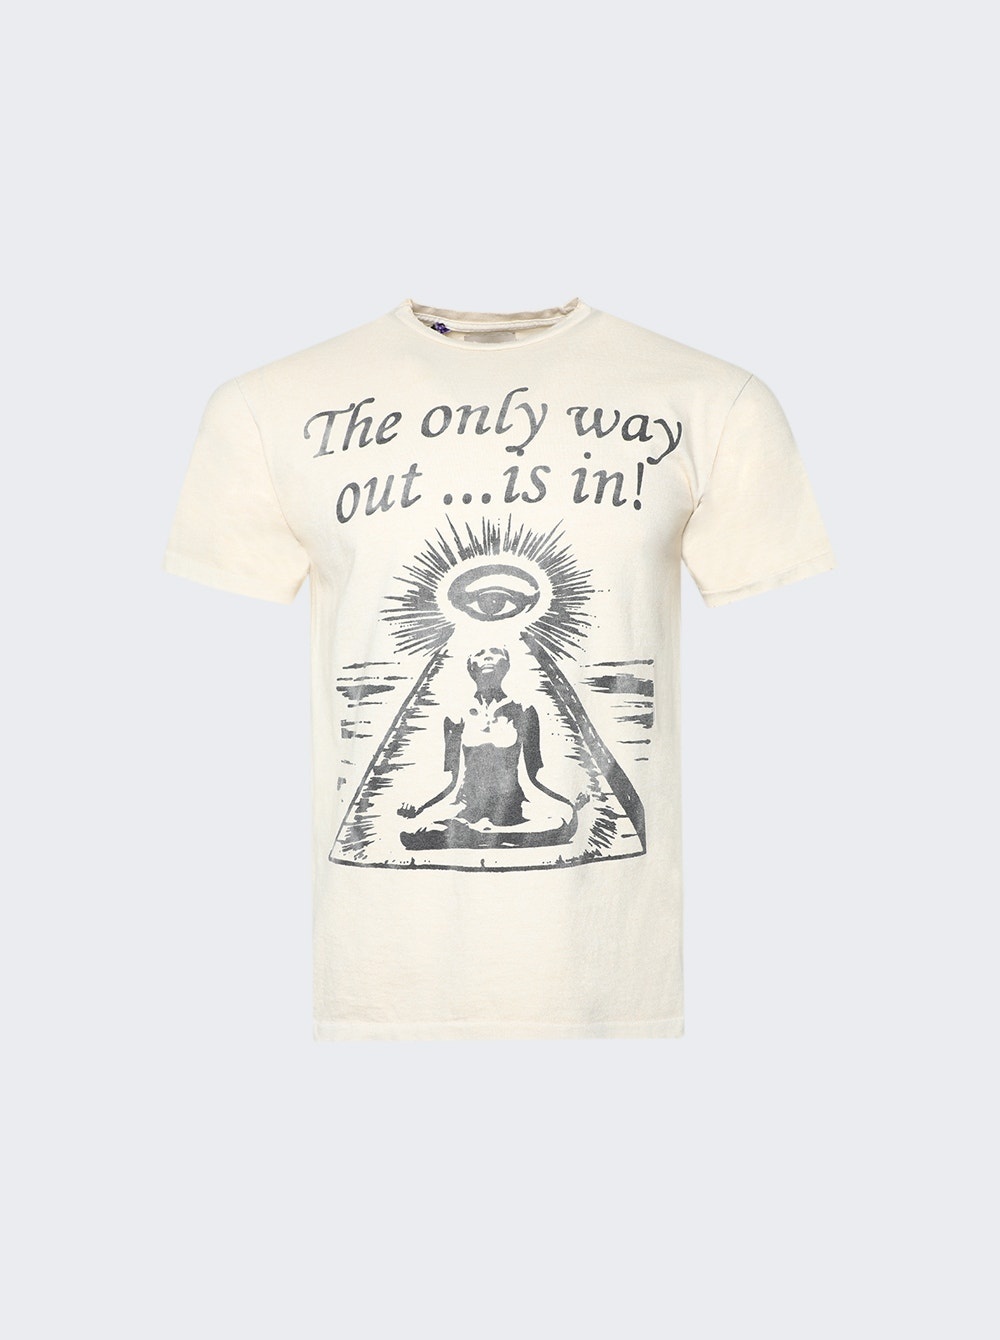 Only Way Out Tee Antique White - 1